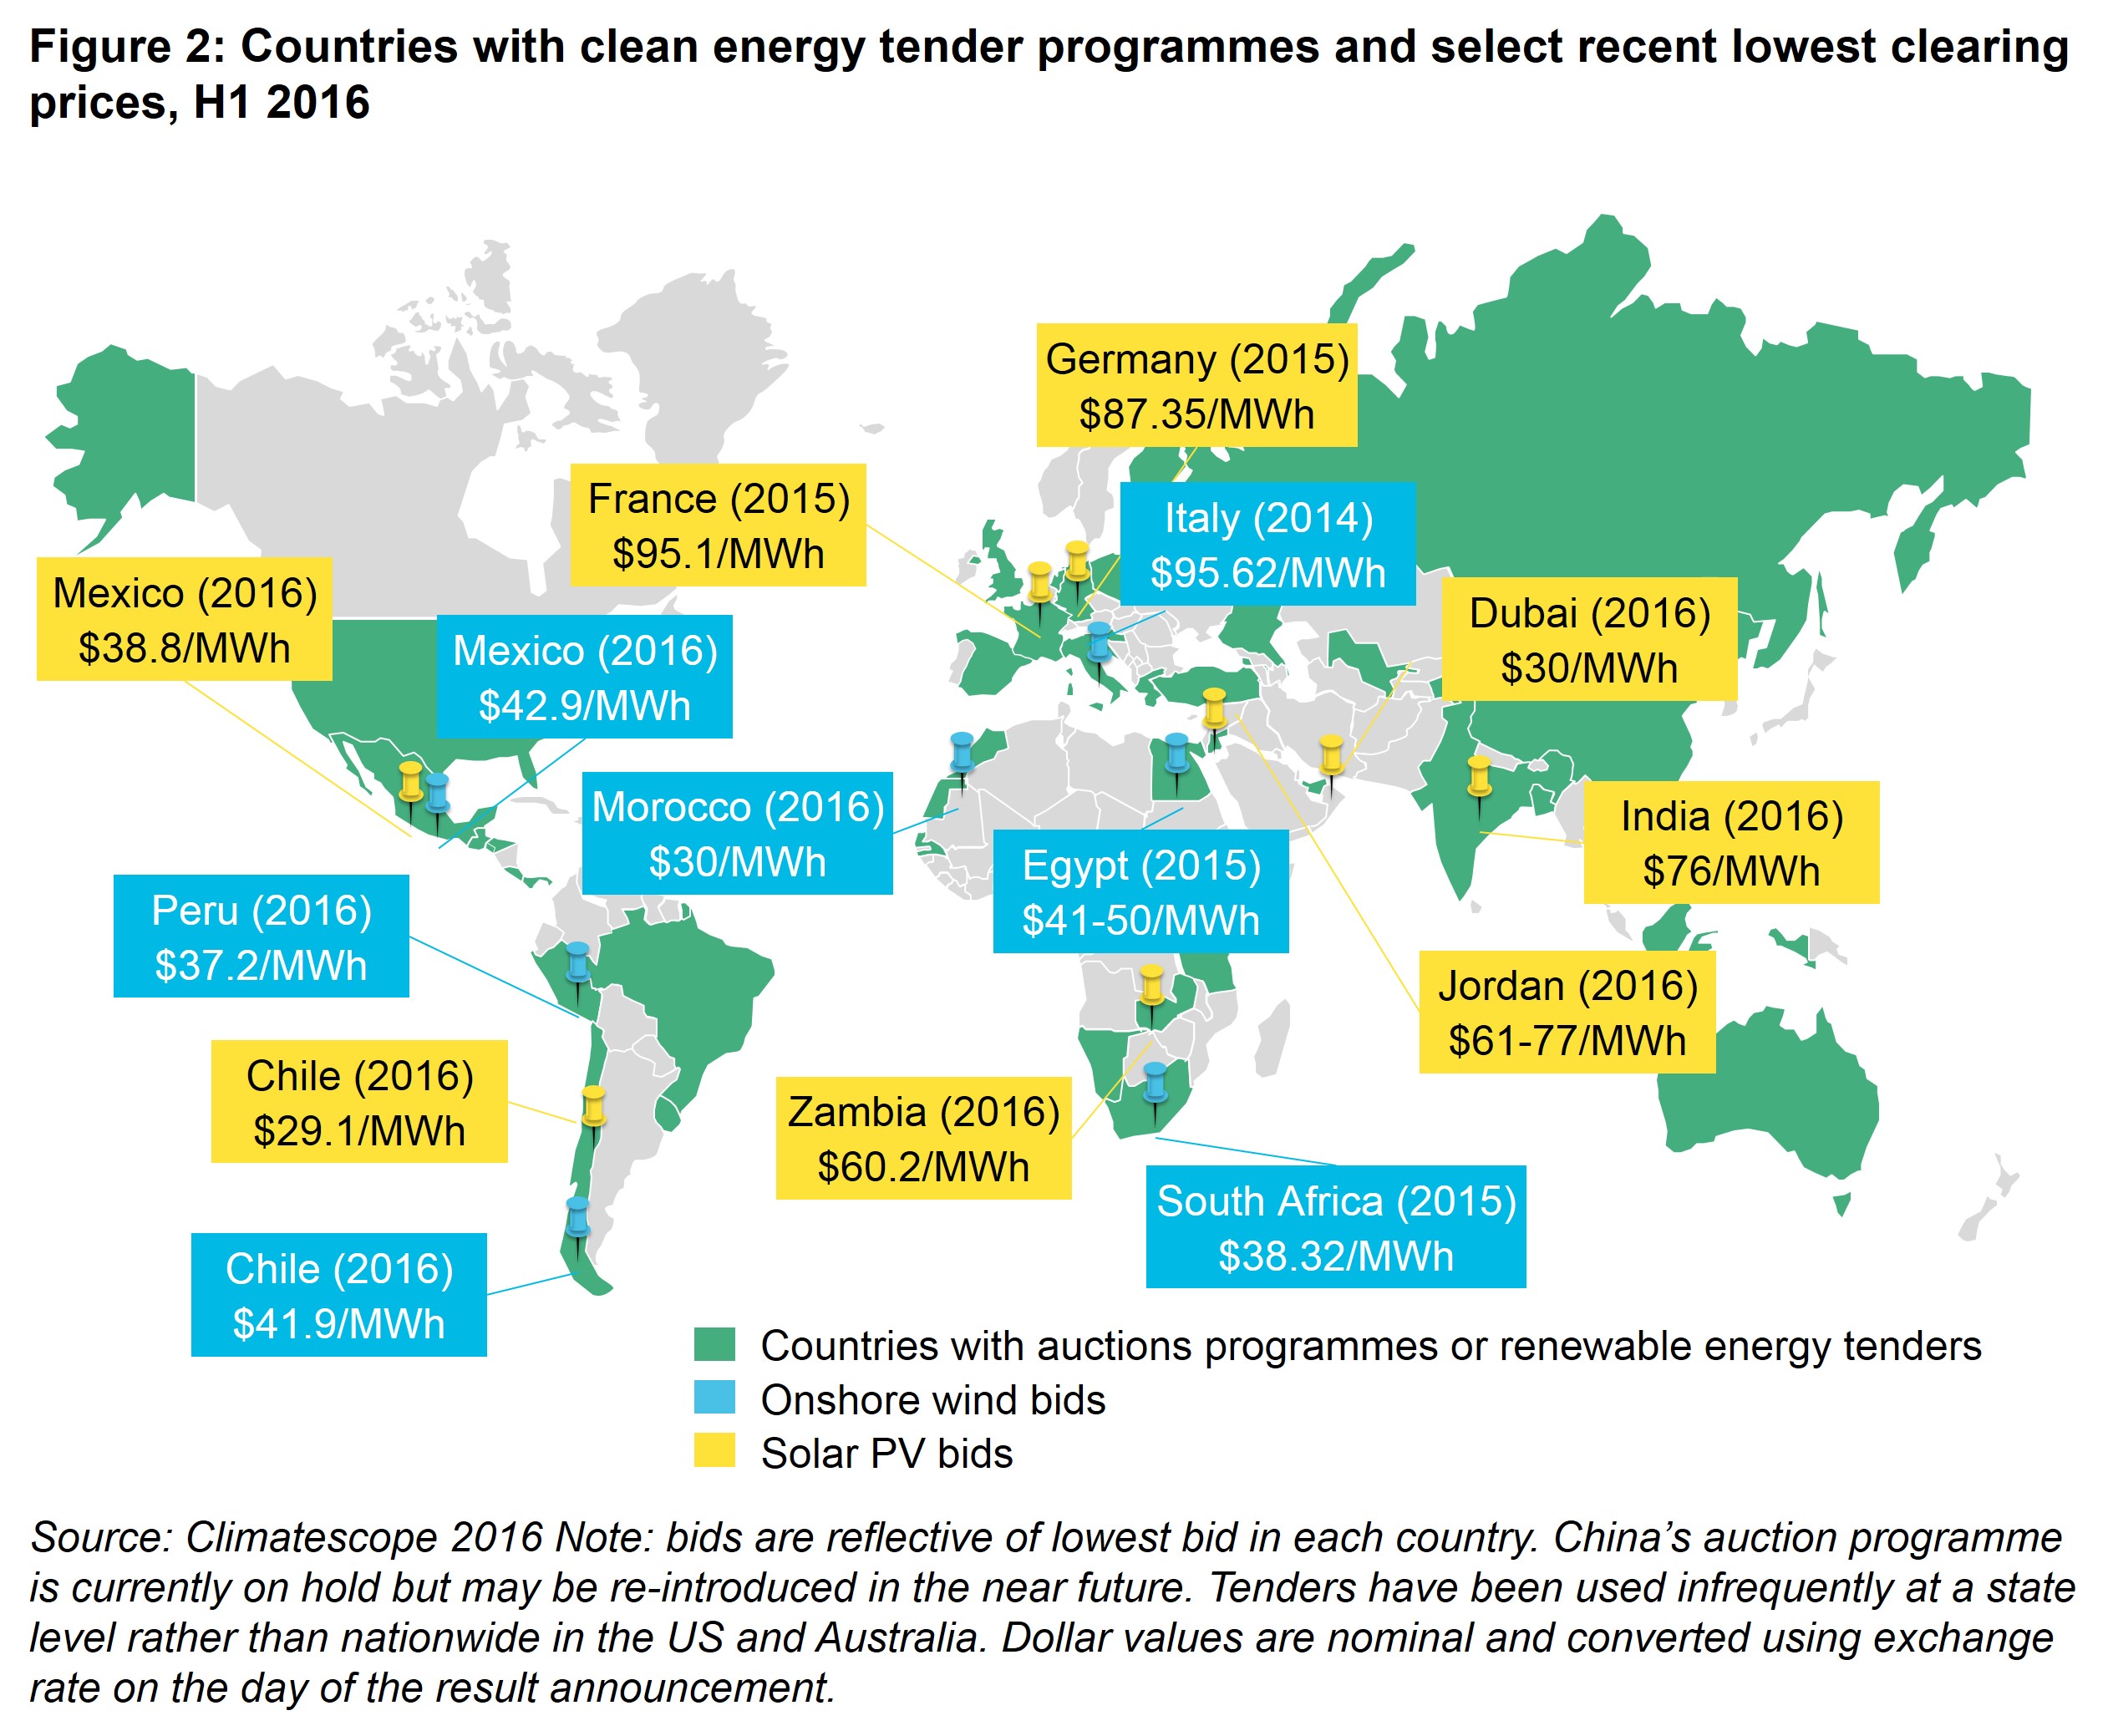 PI Fig 2 - Countries with clean energy tender programmes and select recent lowest clearing prices, H1 2016